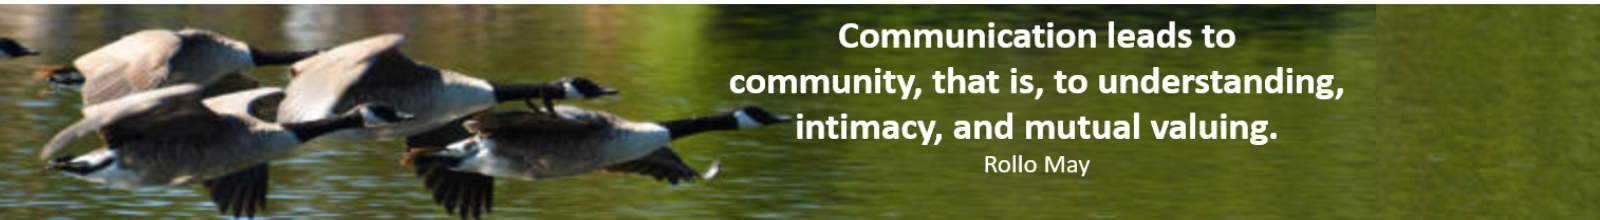 Geese Flying with Quote on Communication